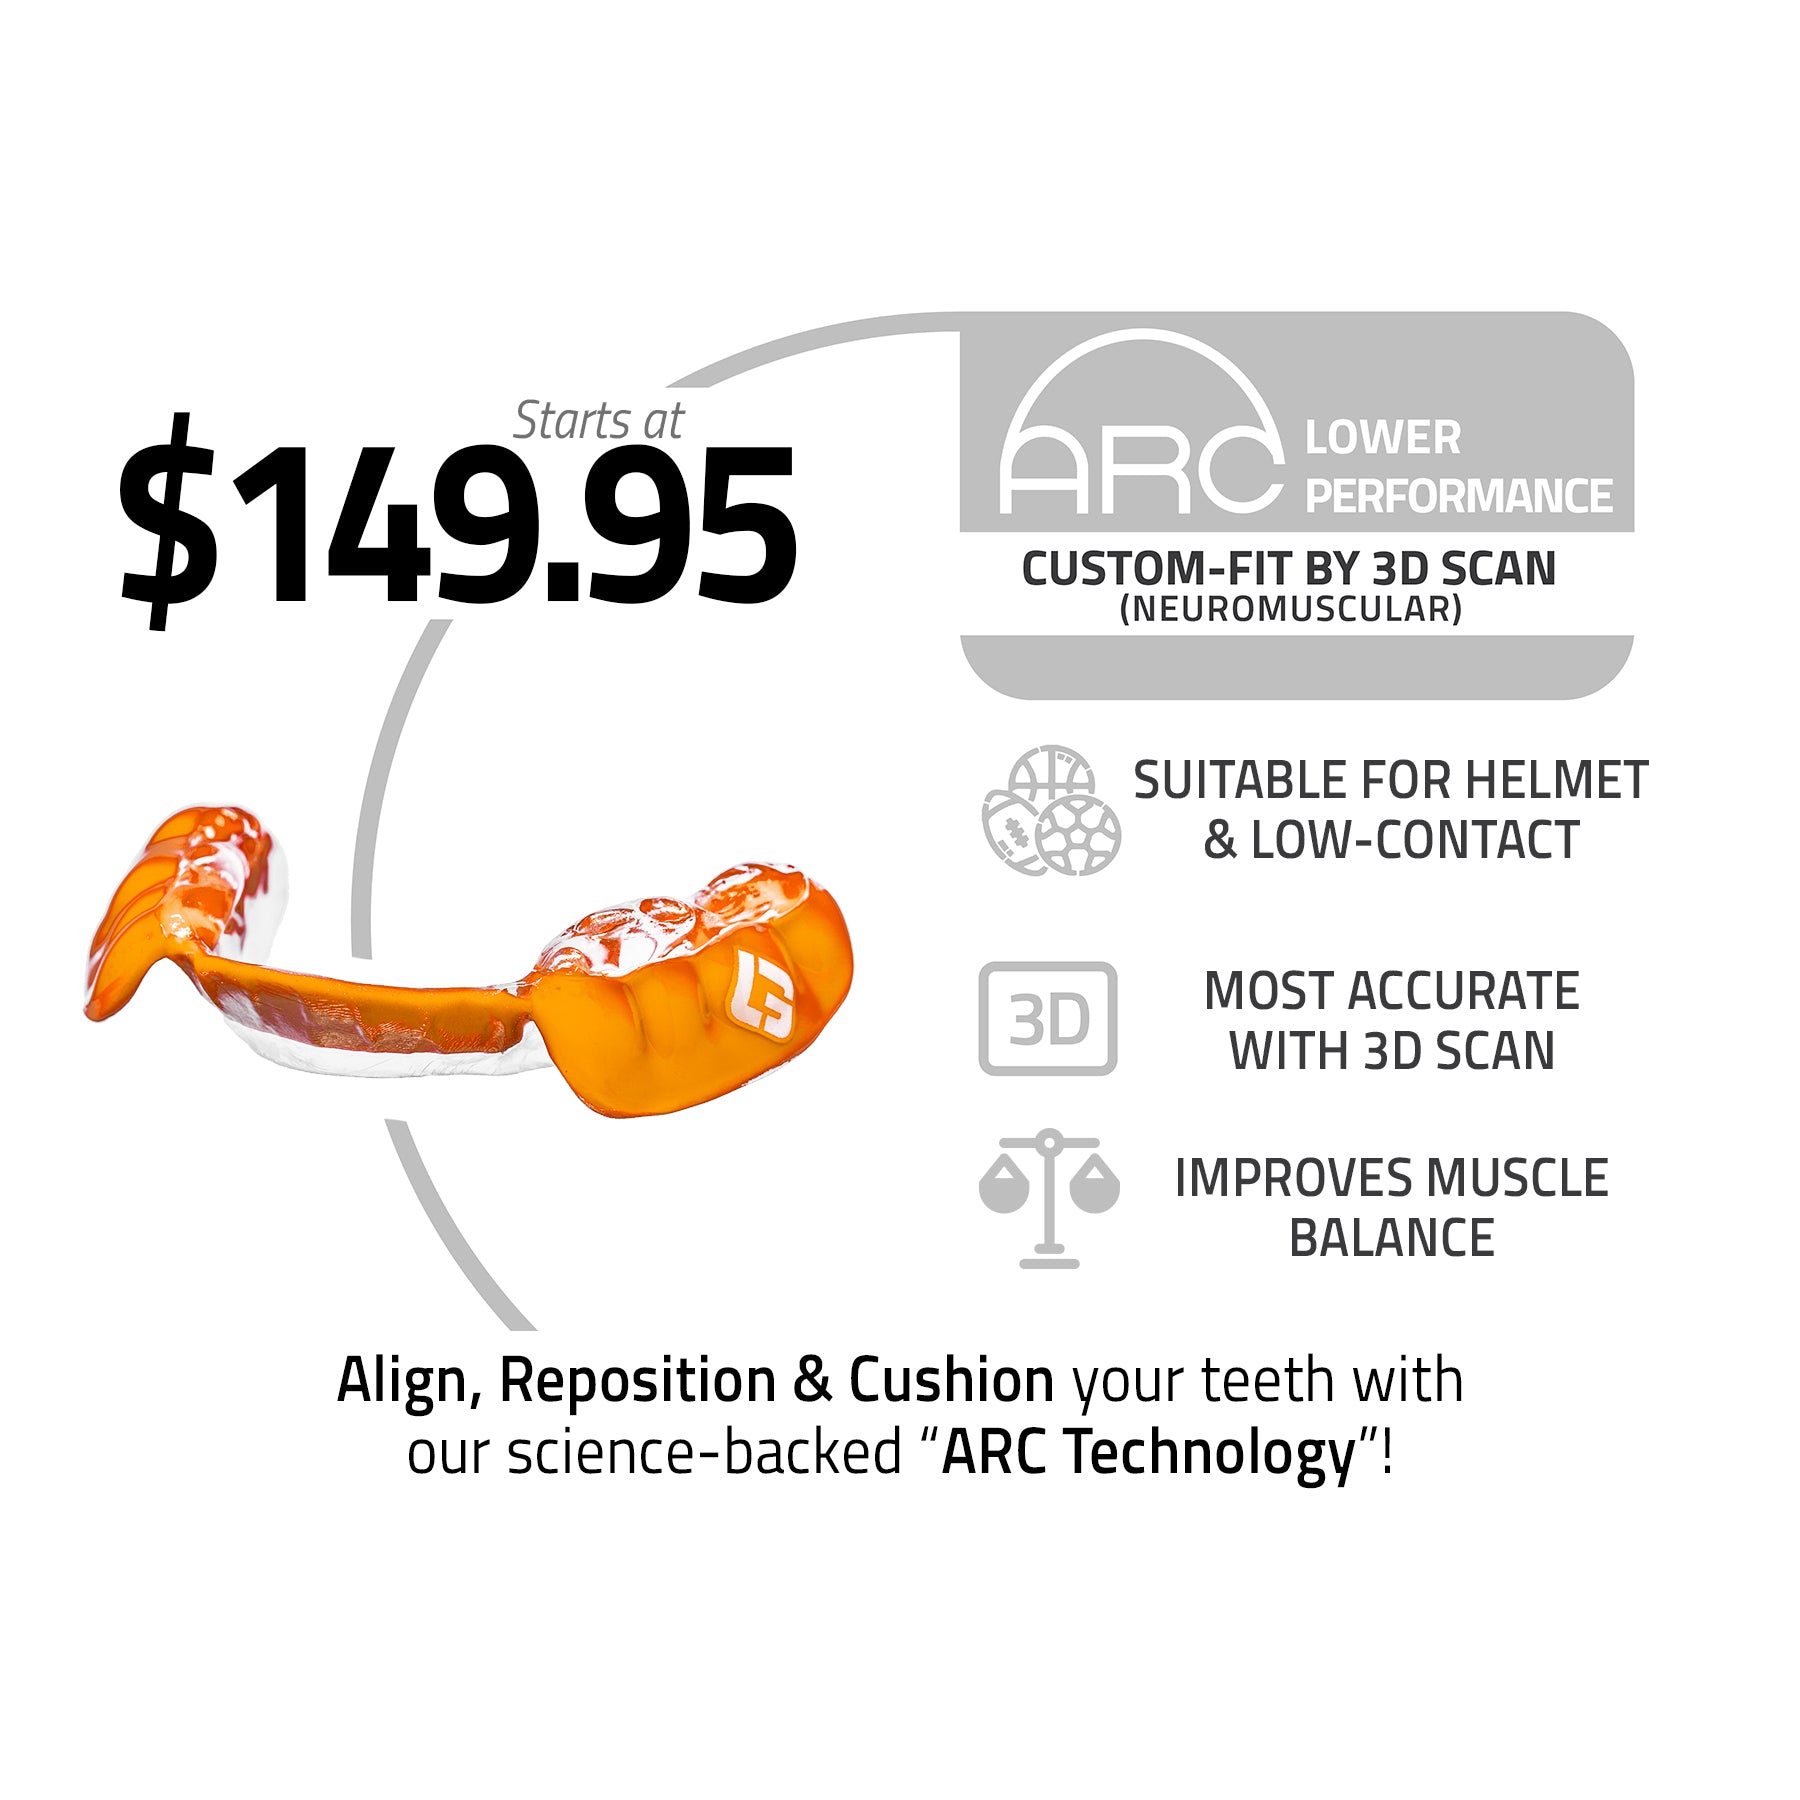 banner, ARC lower performance, custom fit by 3d scan, neuromuscular, starts at $149.95, suitable for helmet and low contact, most accurate with 3d scan, improves muscle balance, align, reposition and cushion your teeth with our science backed, arc technology,